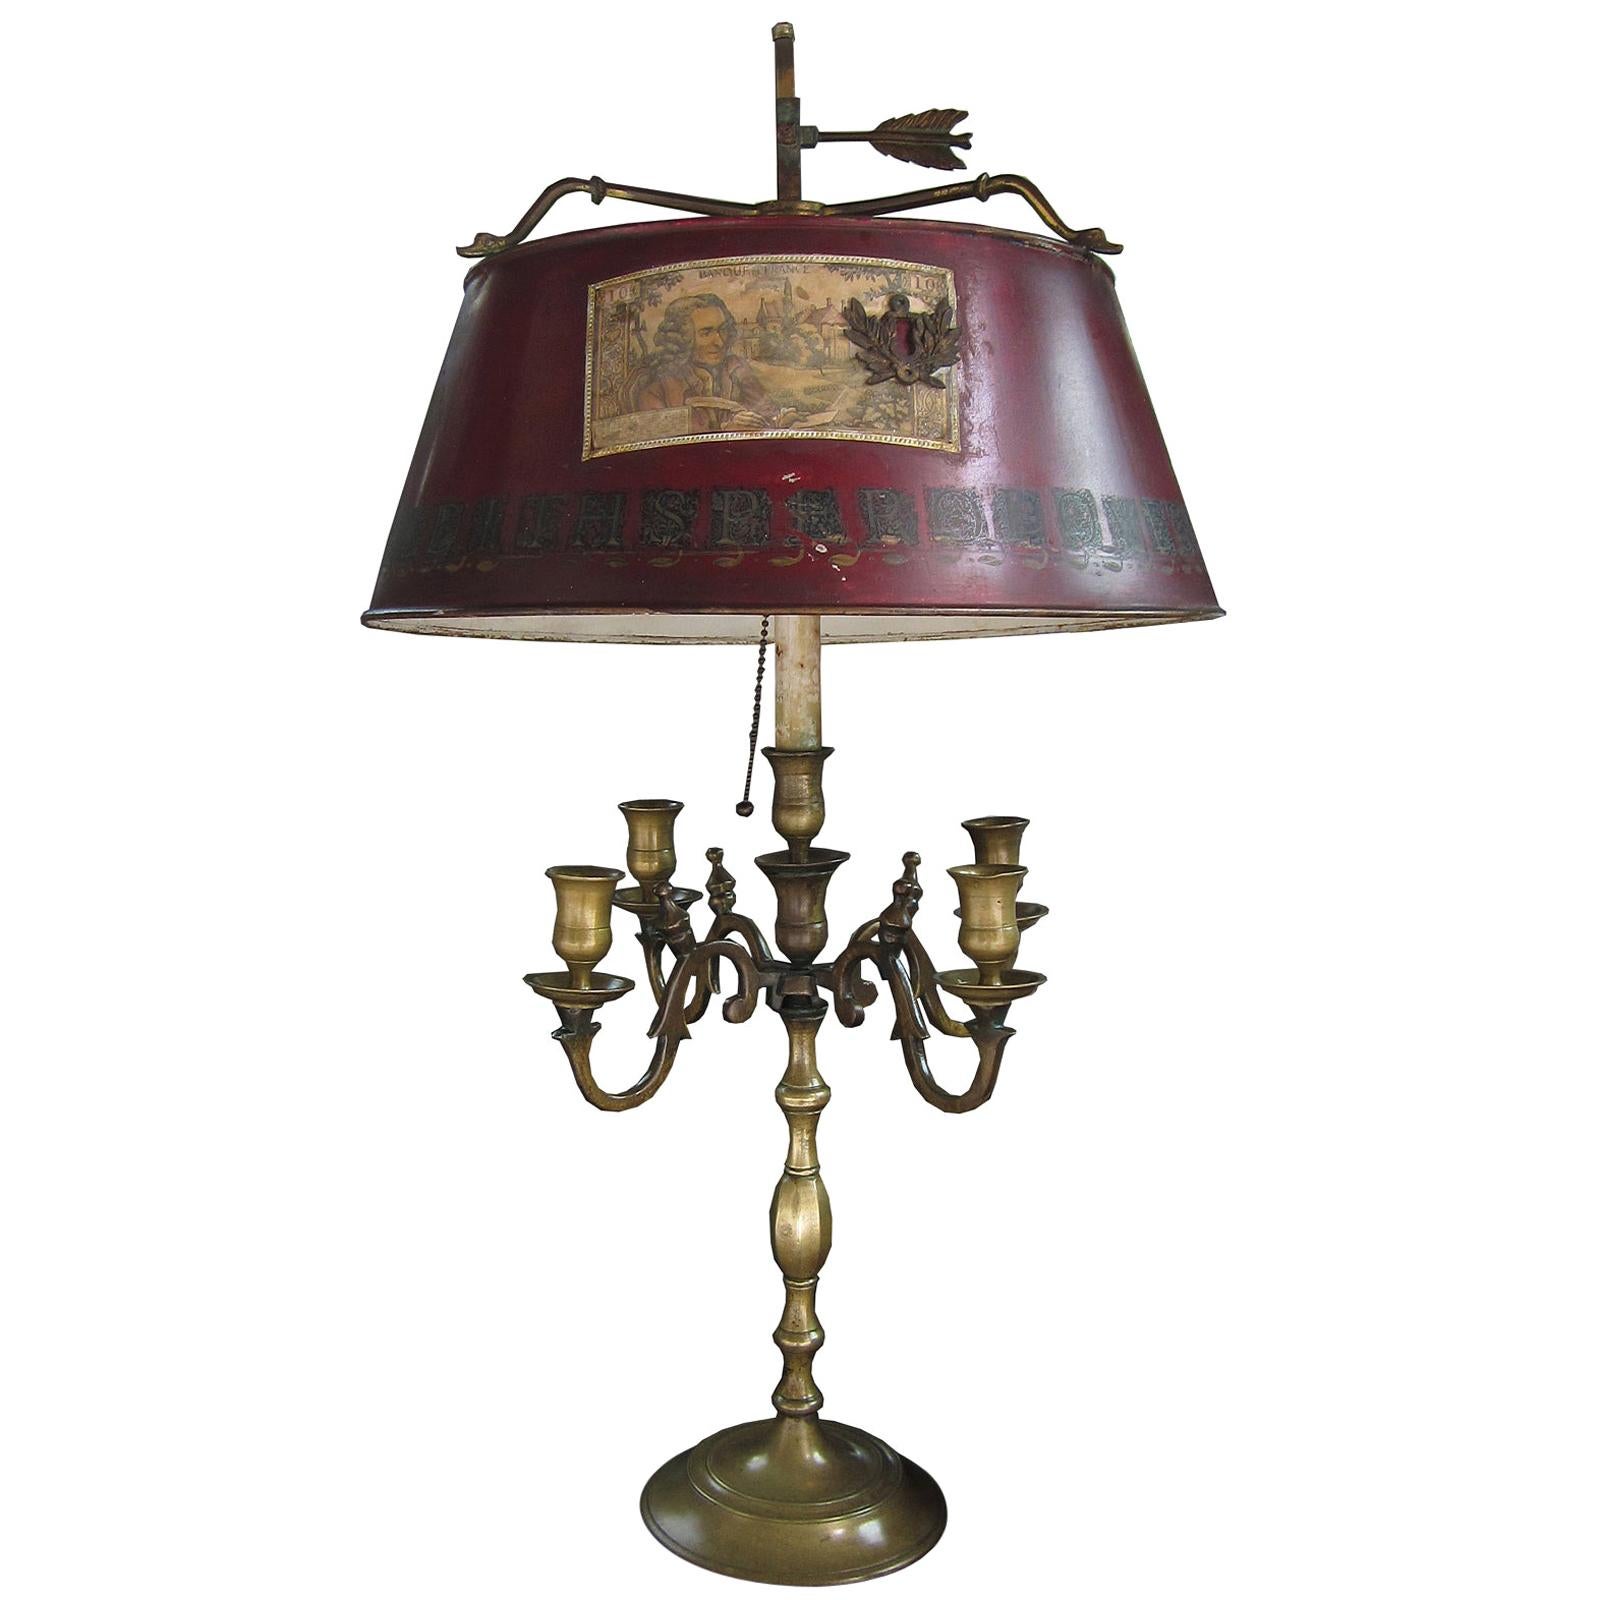 Early 20th Century Bronze Four-Arm Bouillotte Lamp with Decoupage Tole Shade